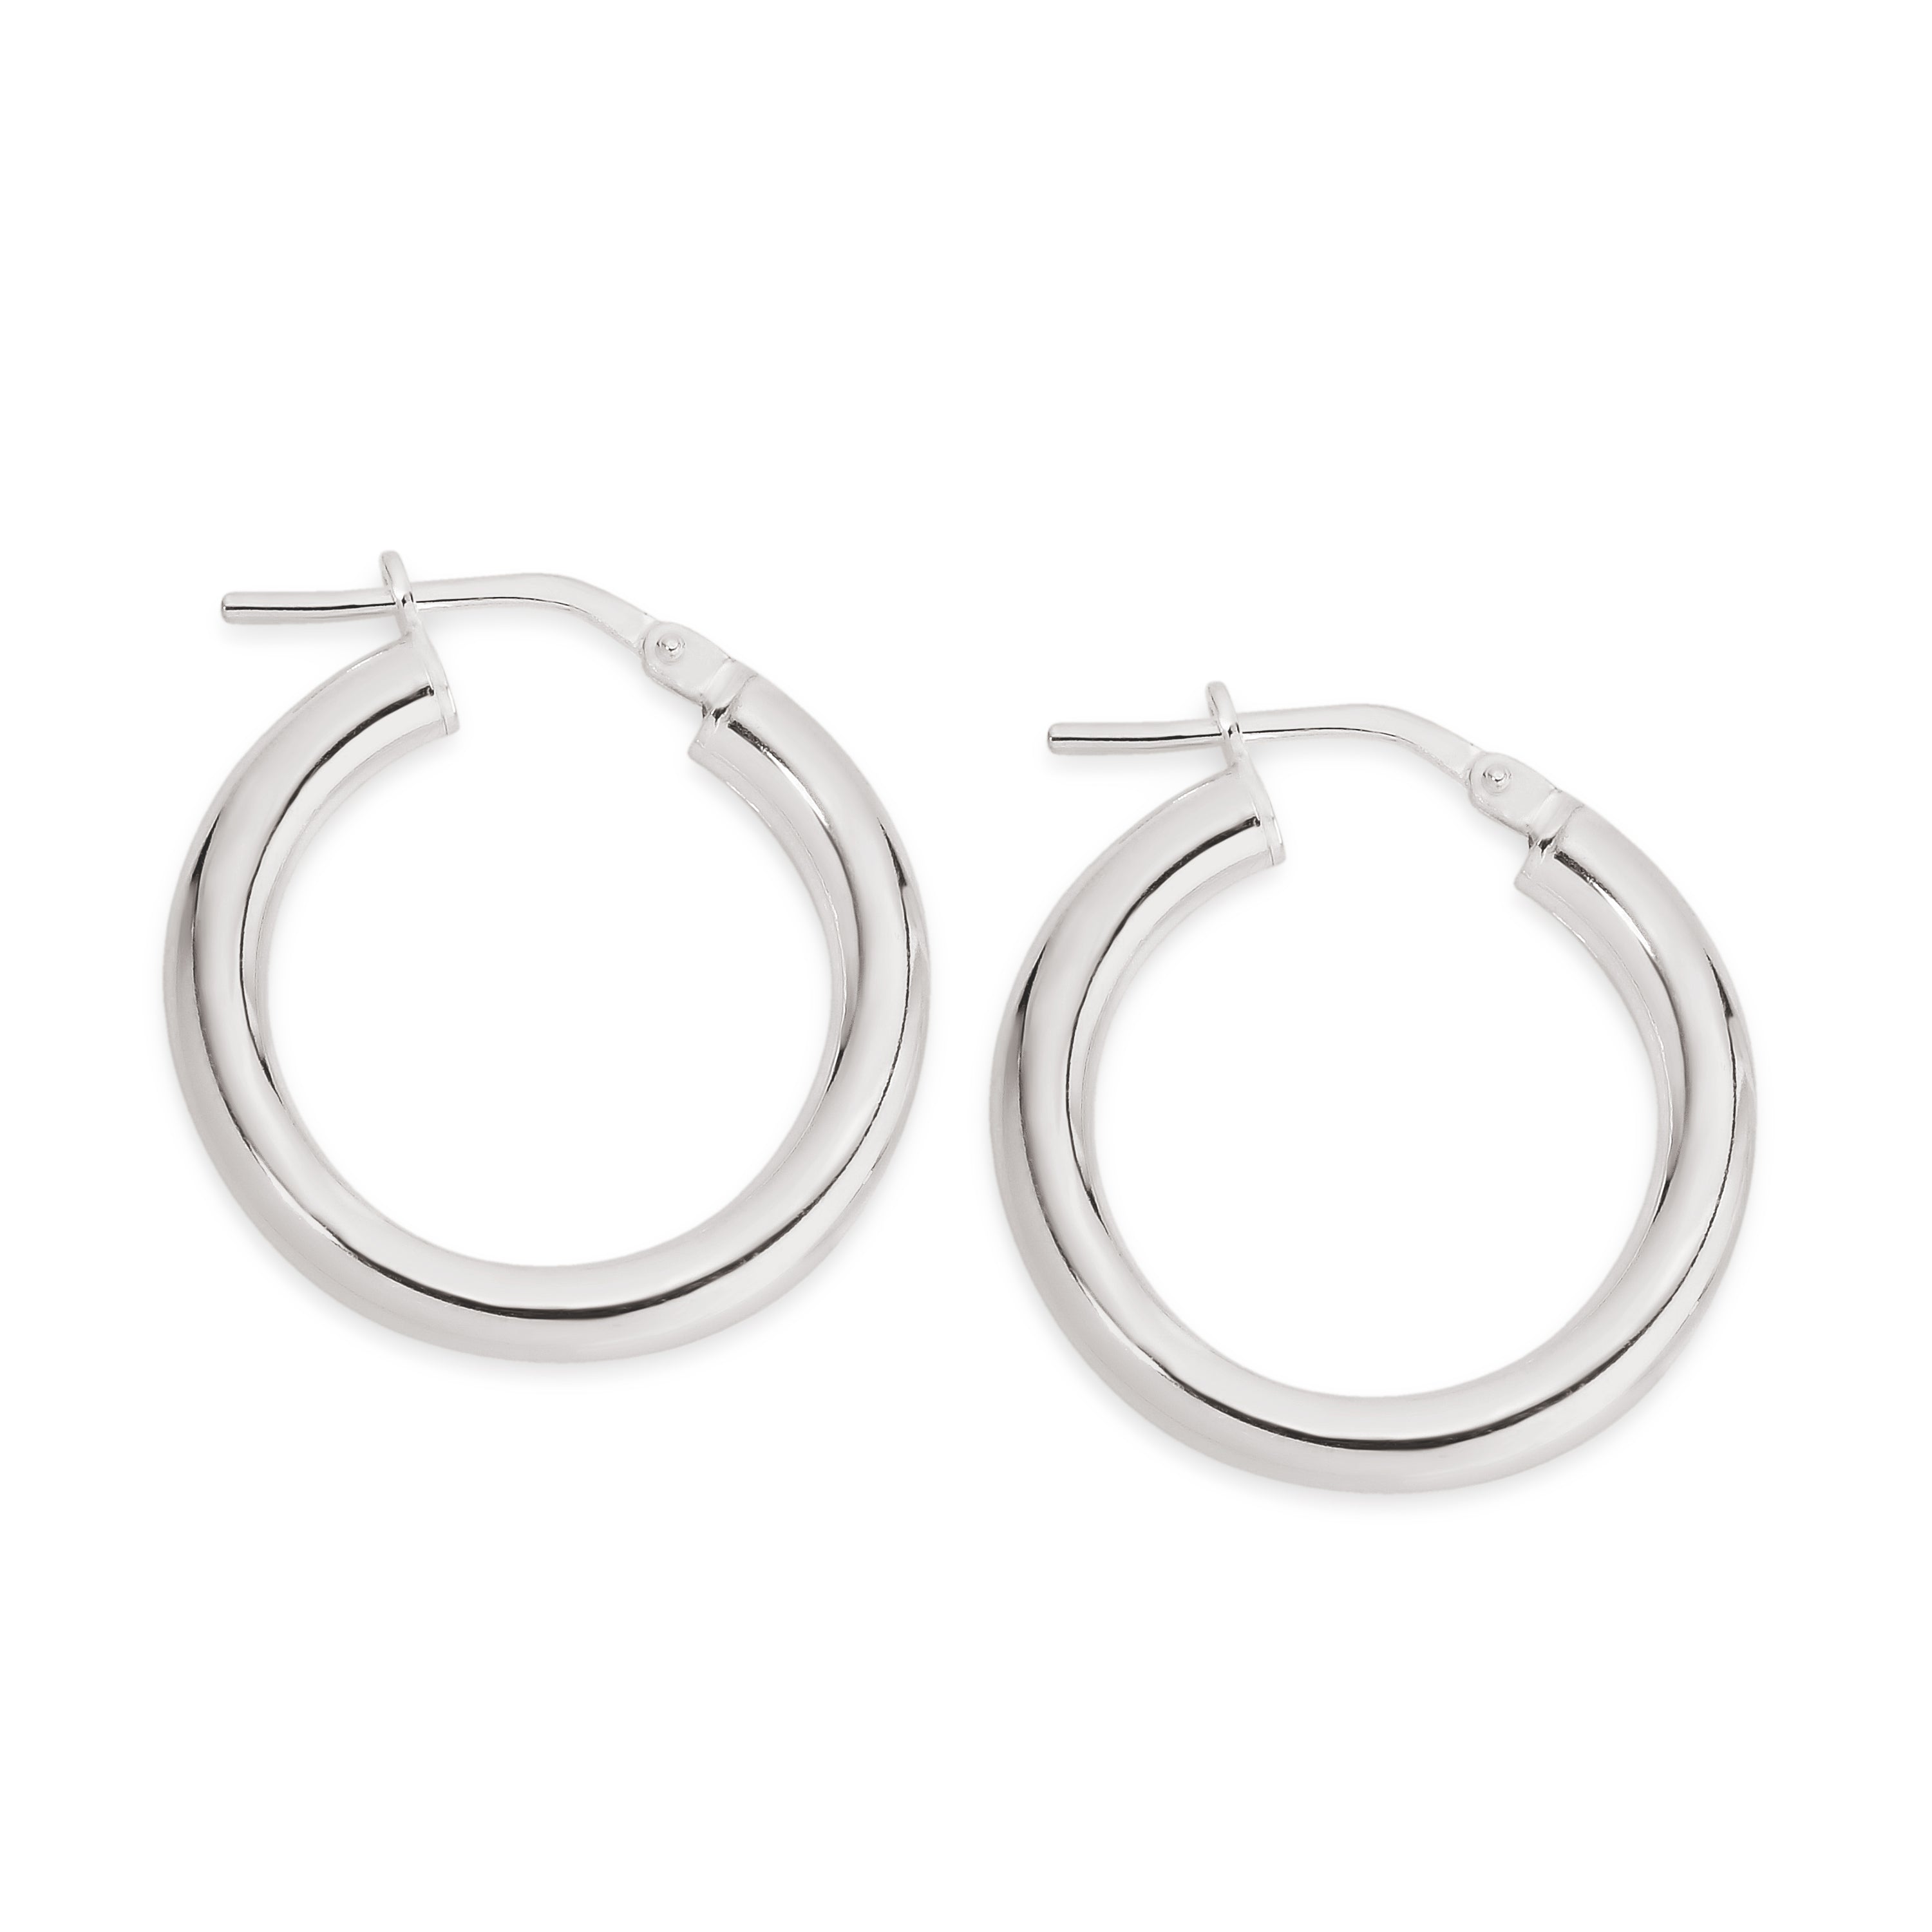 Silver polished hoops 15mm